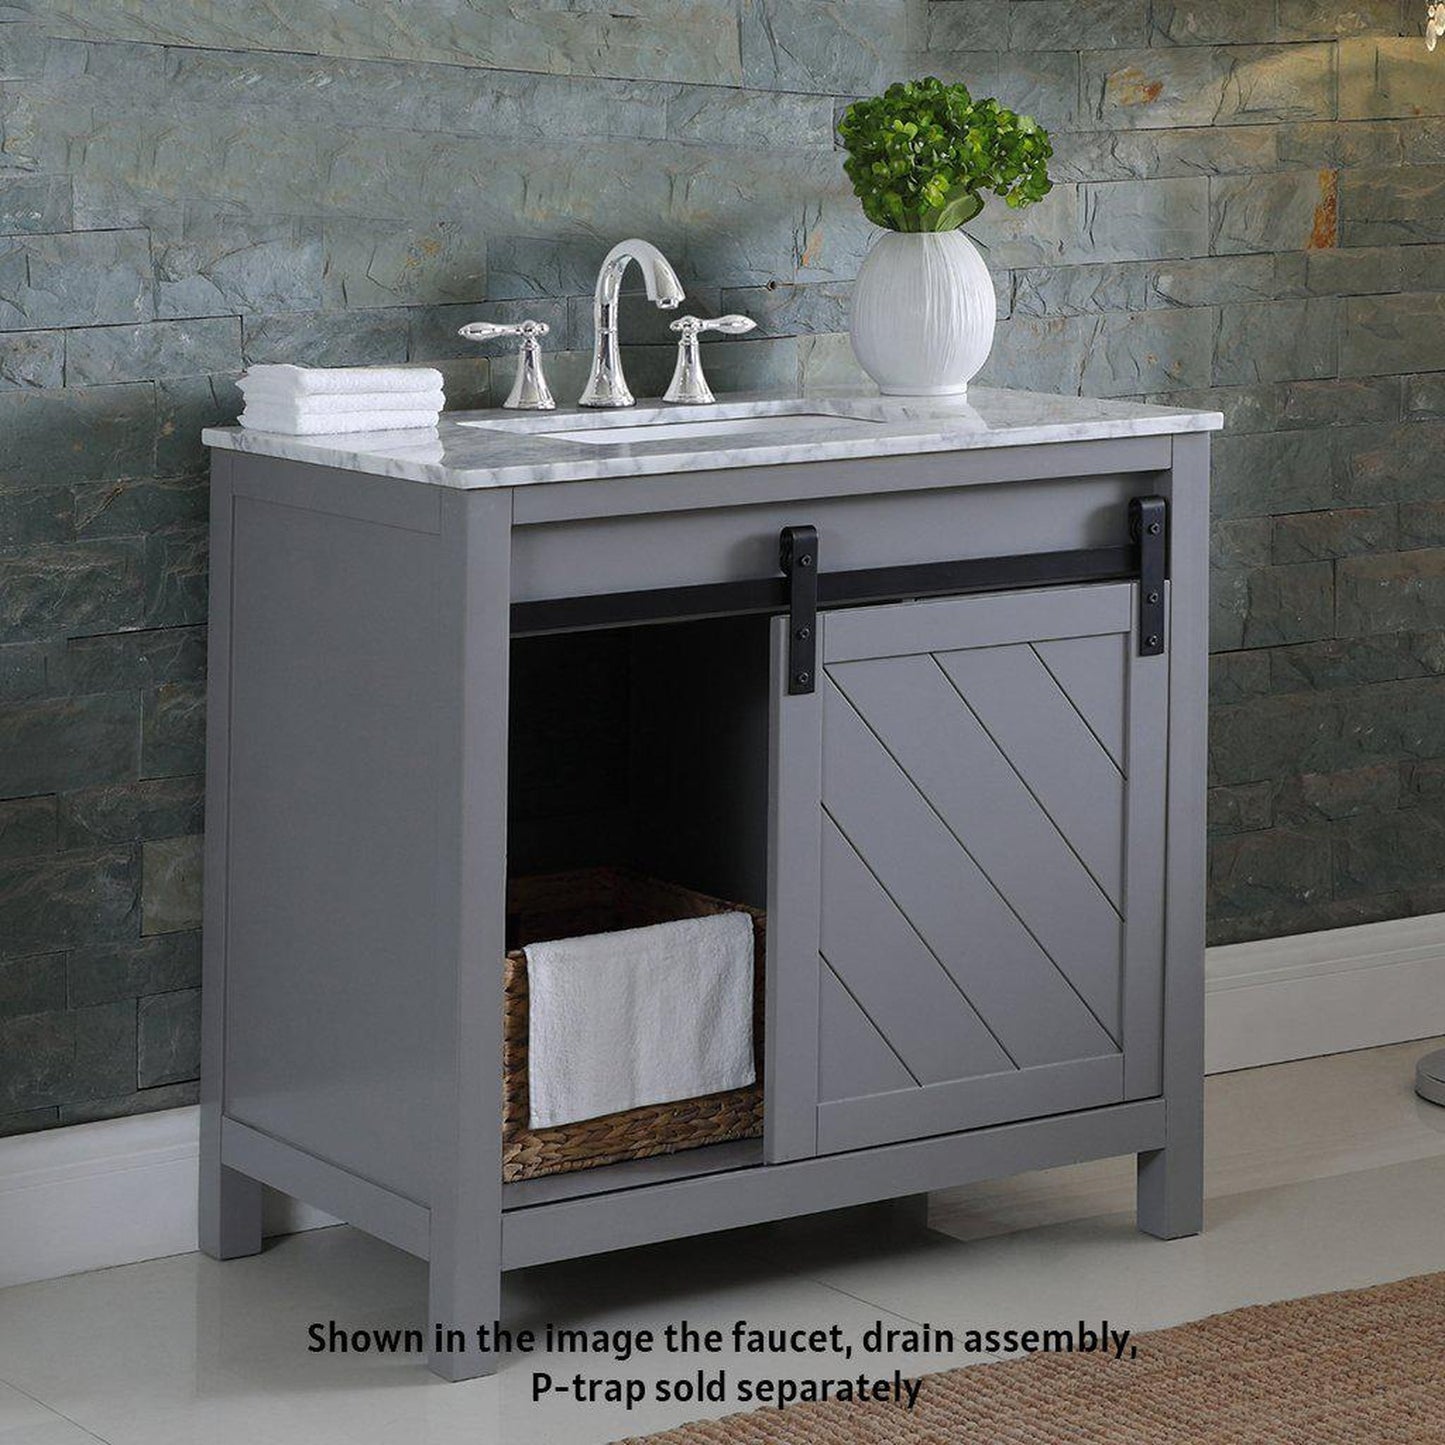 Altair Kinsley 36" Single Gray Freestanding Bathroom Vanity Set With Natural Carrara White Marble Top, Rectangular Undermount Ceramic Sink, and Overflow